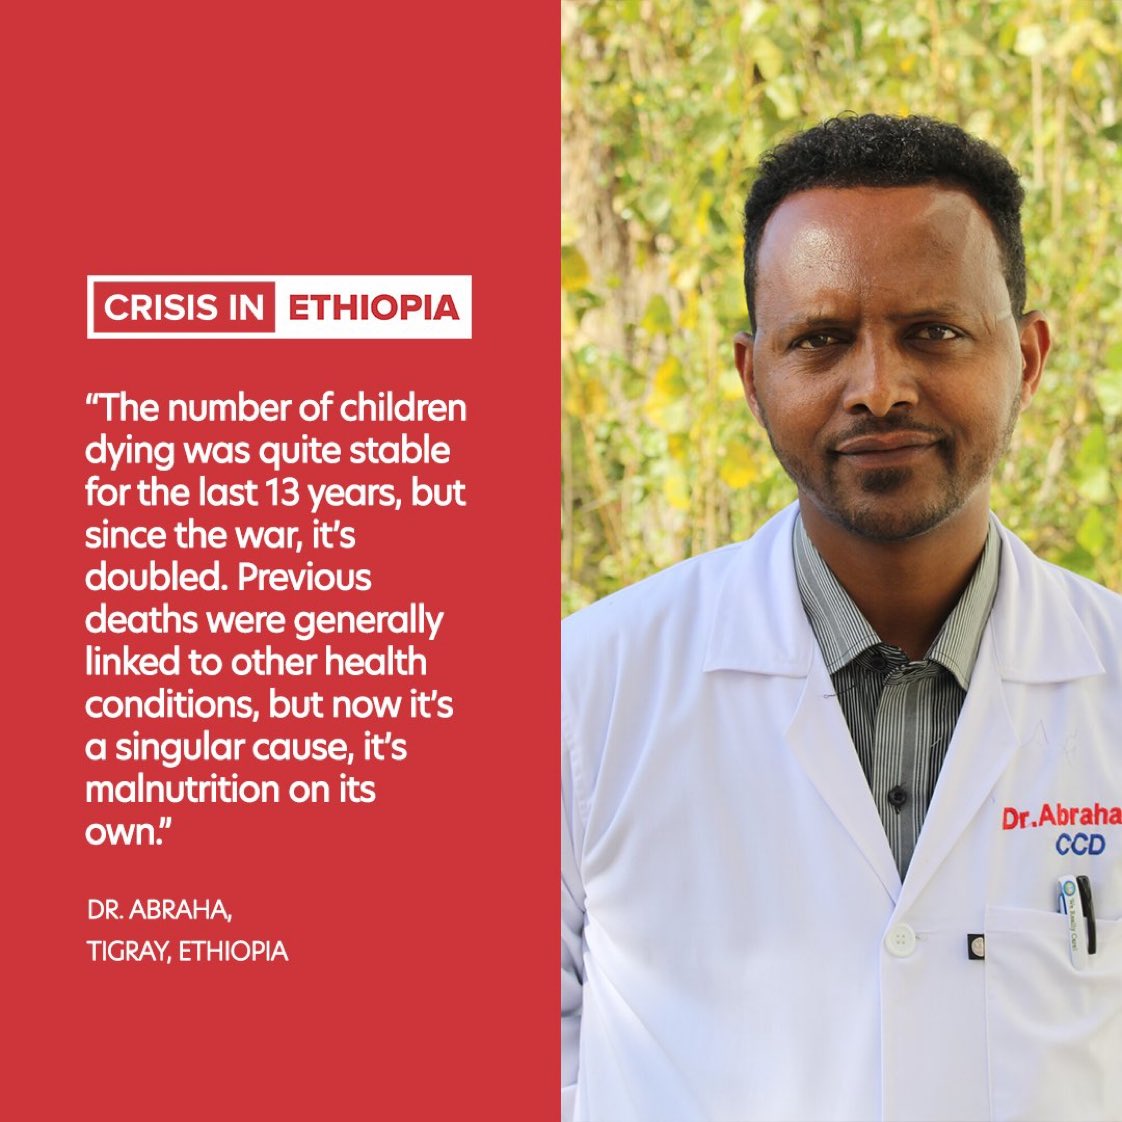 Doctor #Abraha is a paediatrician at Ayder Hospital – the largest in Tigray. He shares his concerns about the alarming increase in the number of children dying of malnutrition in his facility. @WHO @ICRC @UNICEF @HT #ResumeAid4Tigray #Justice4Tigray marysmeals.org/news/articles/